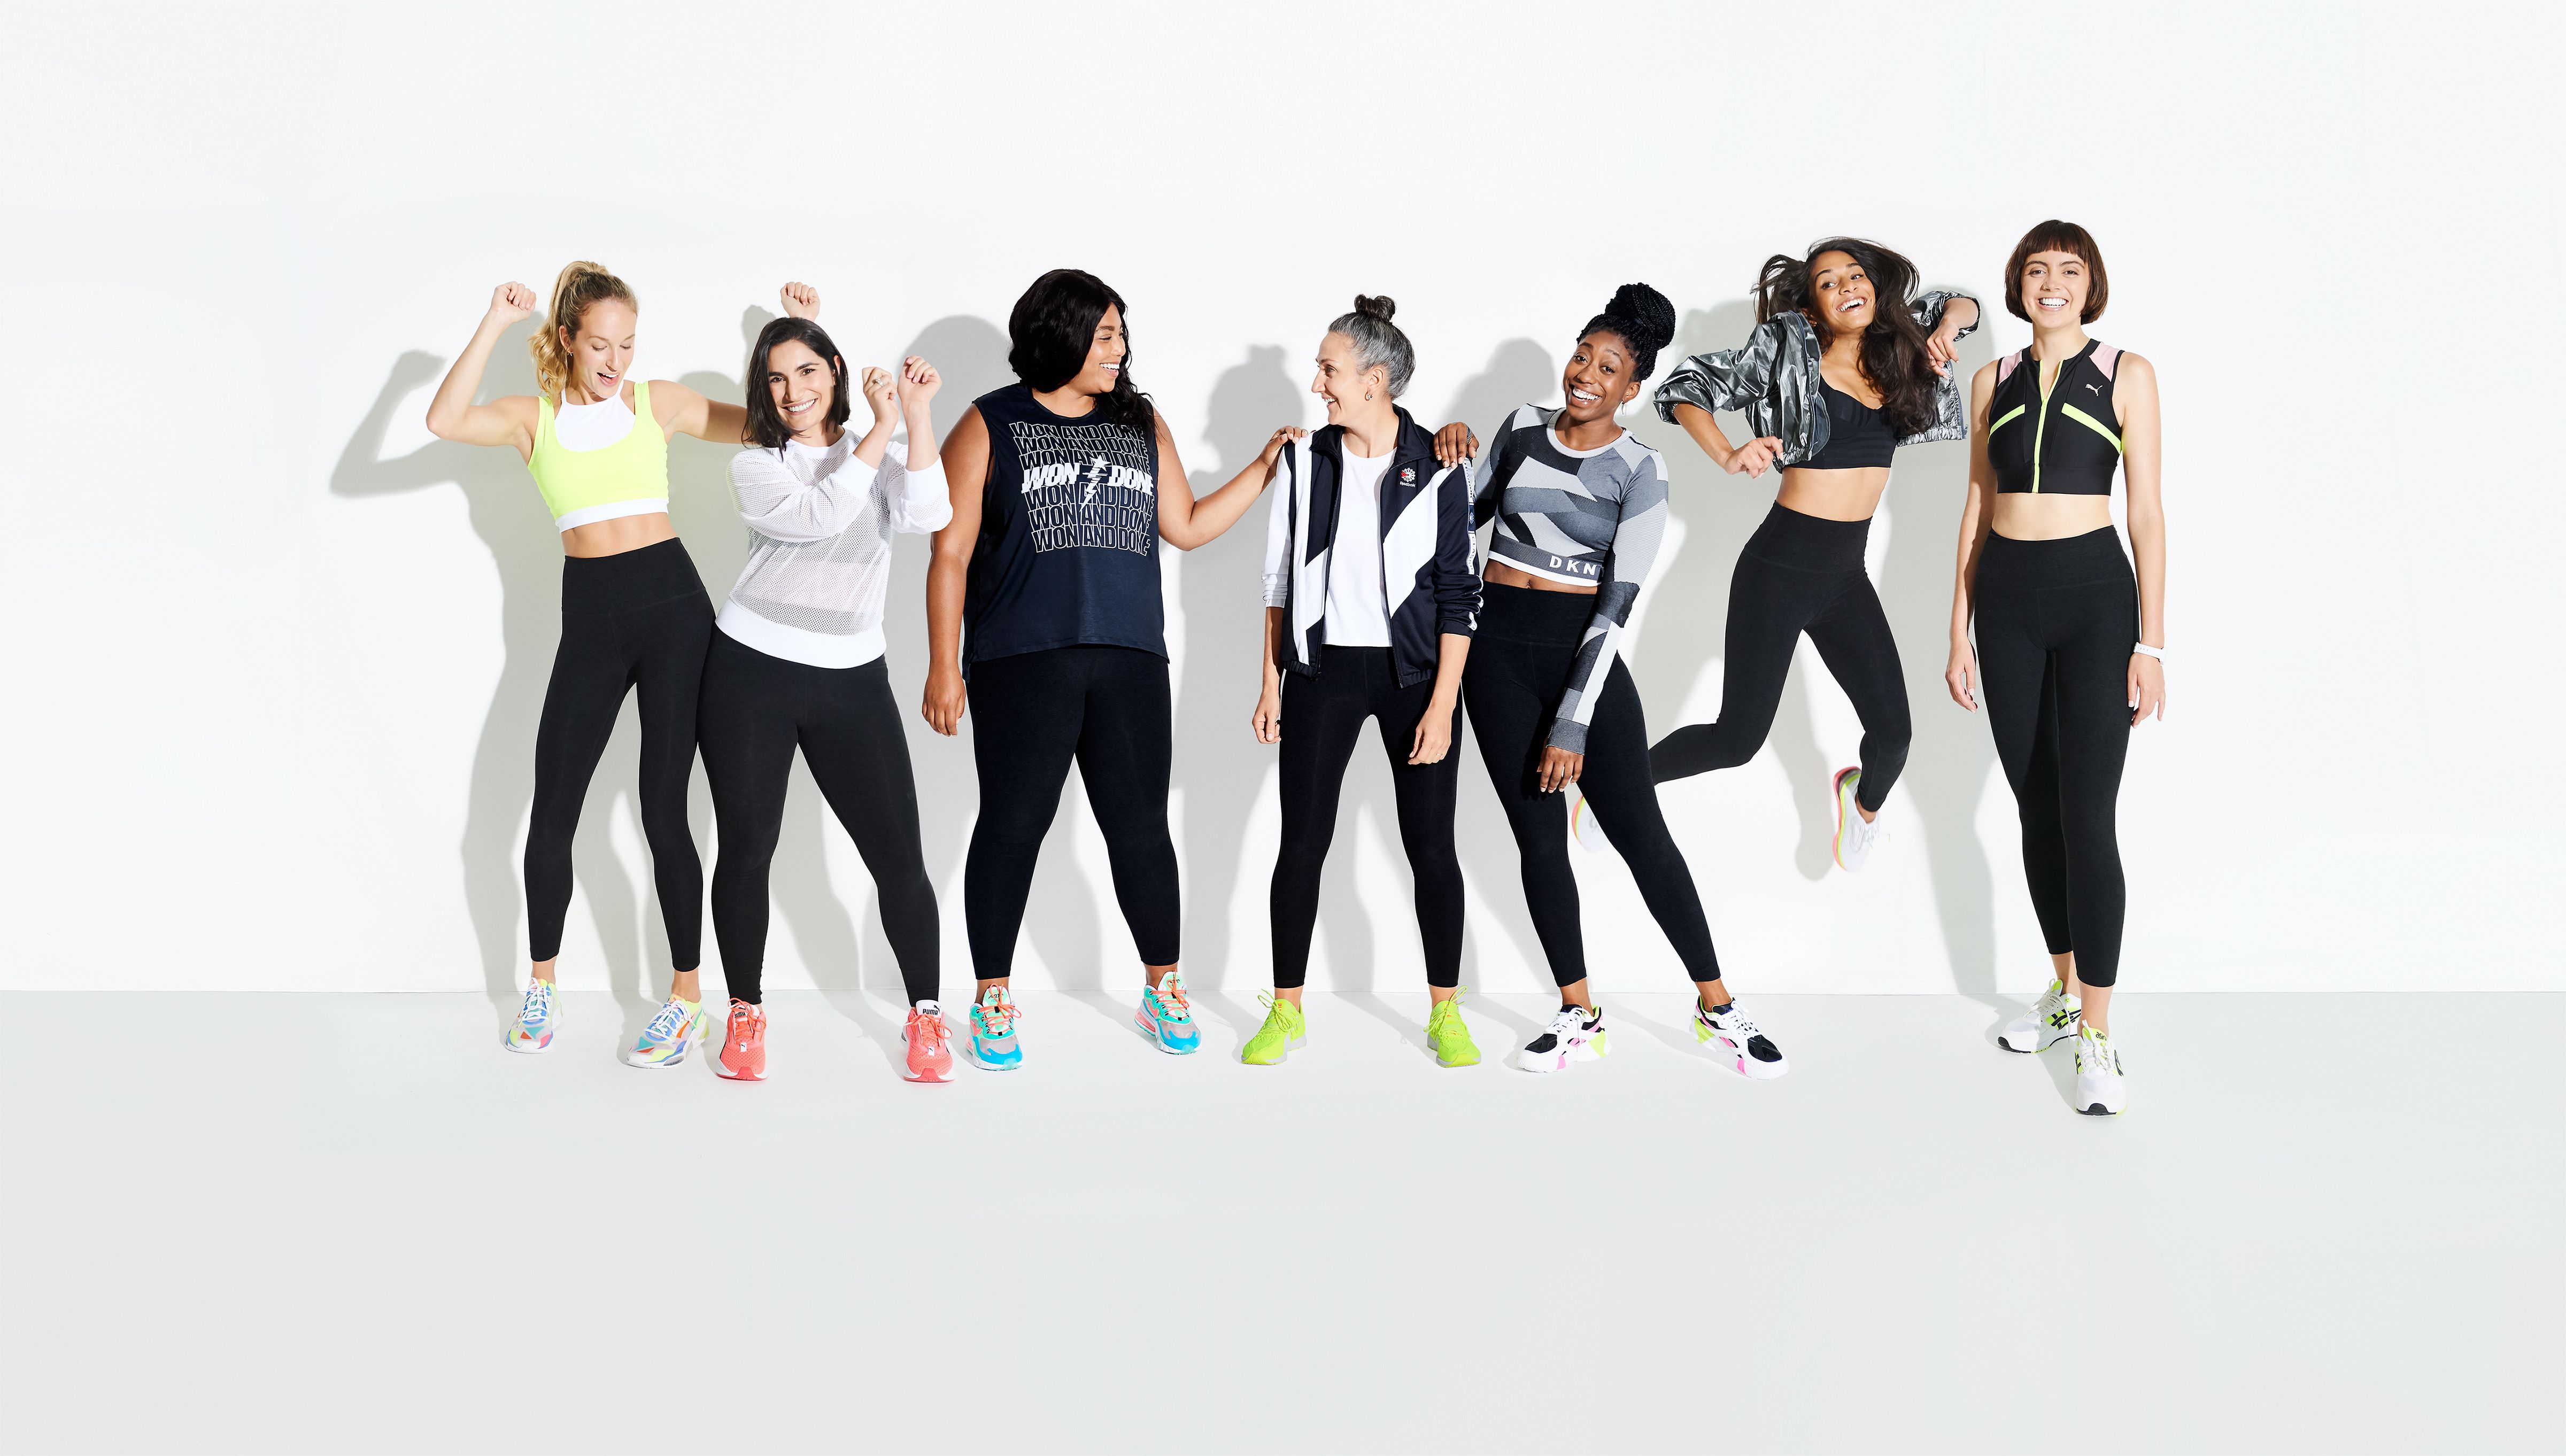 Beyond Yoga Leggings Look Good On Women Of Any Size: Review